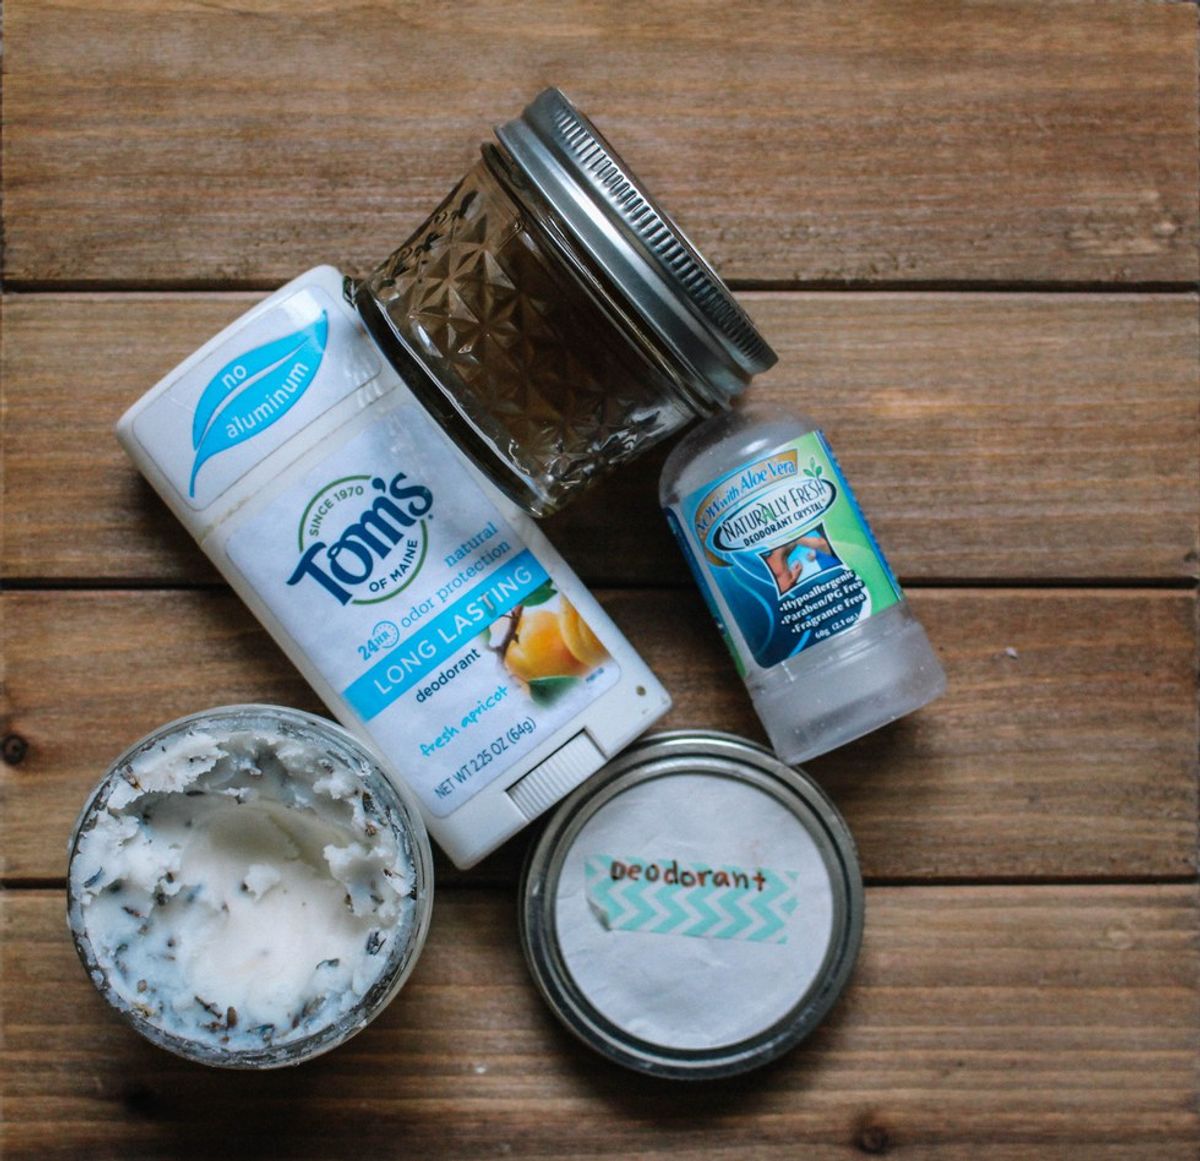 I Tried 4 Natural Deodorants So You Don't Have To